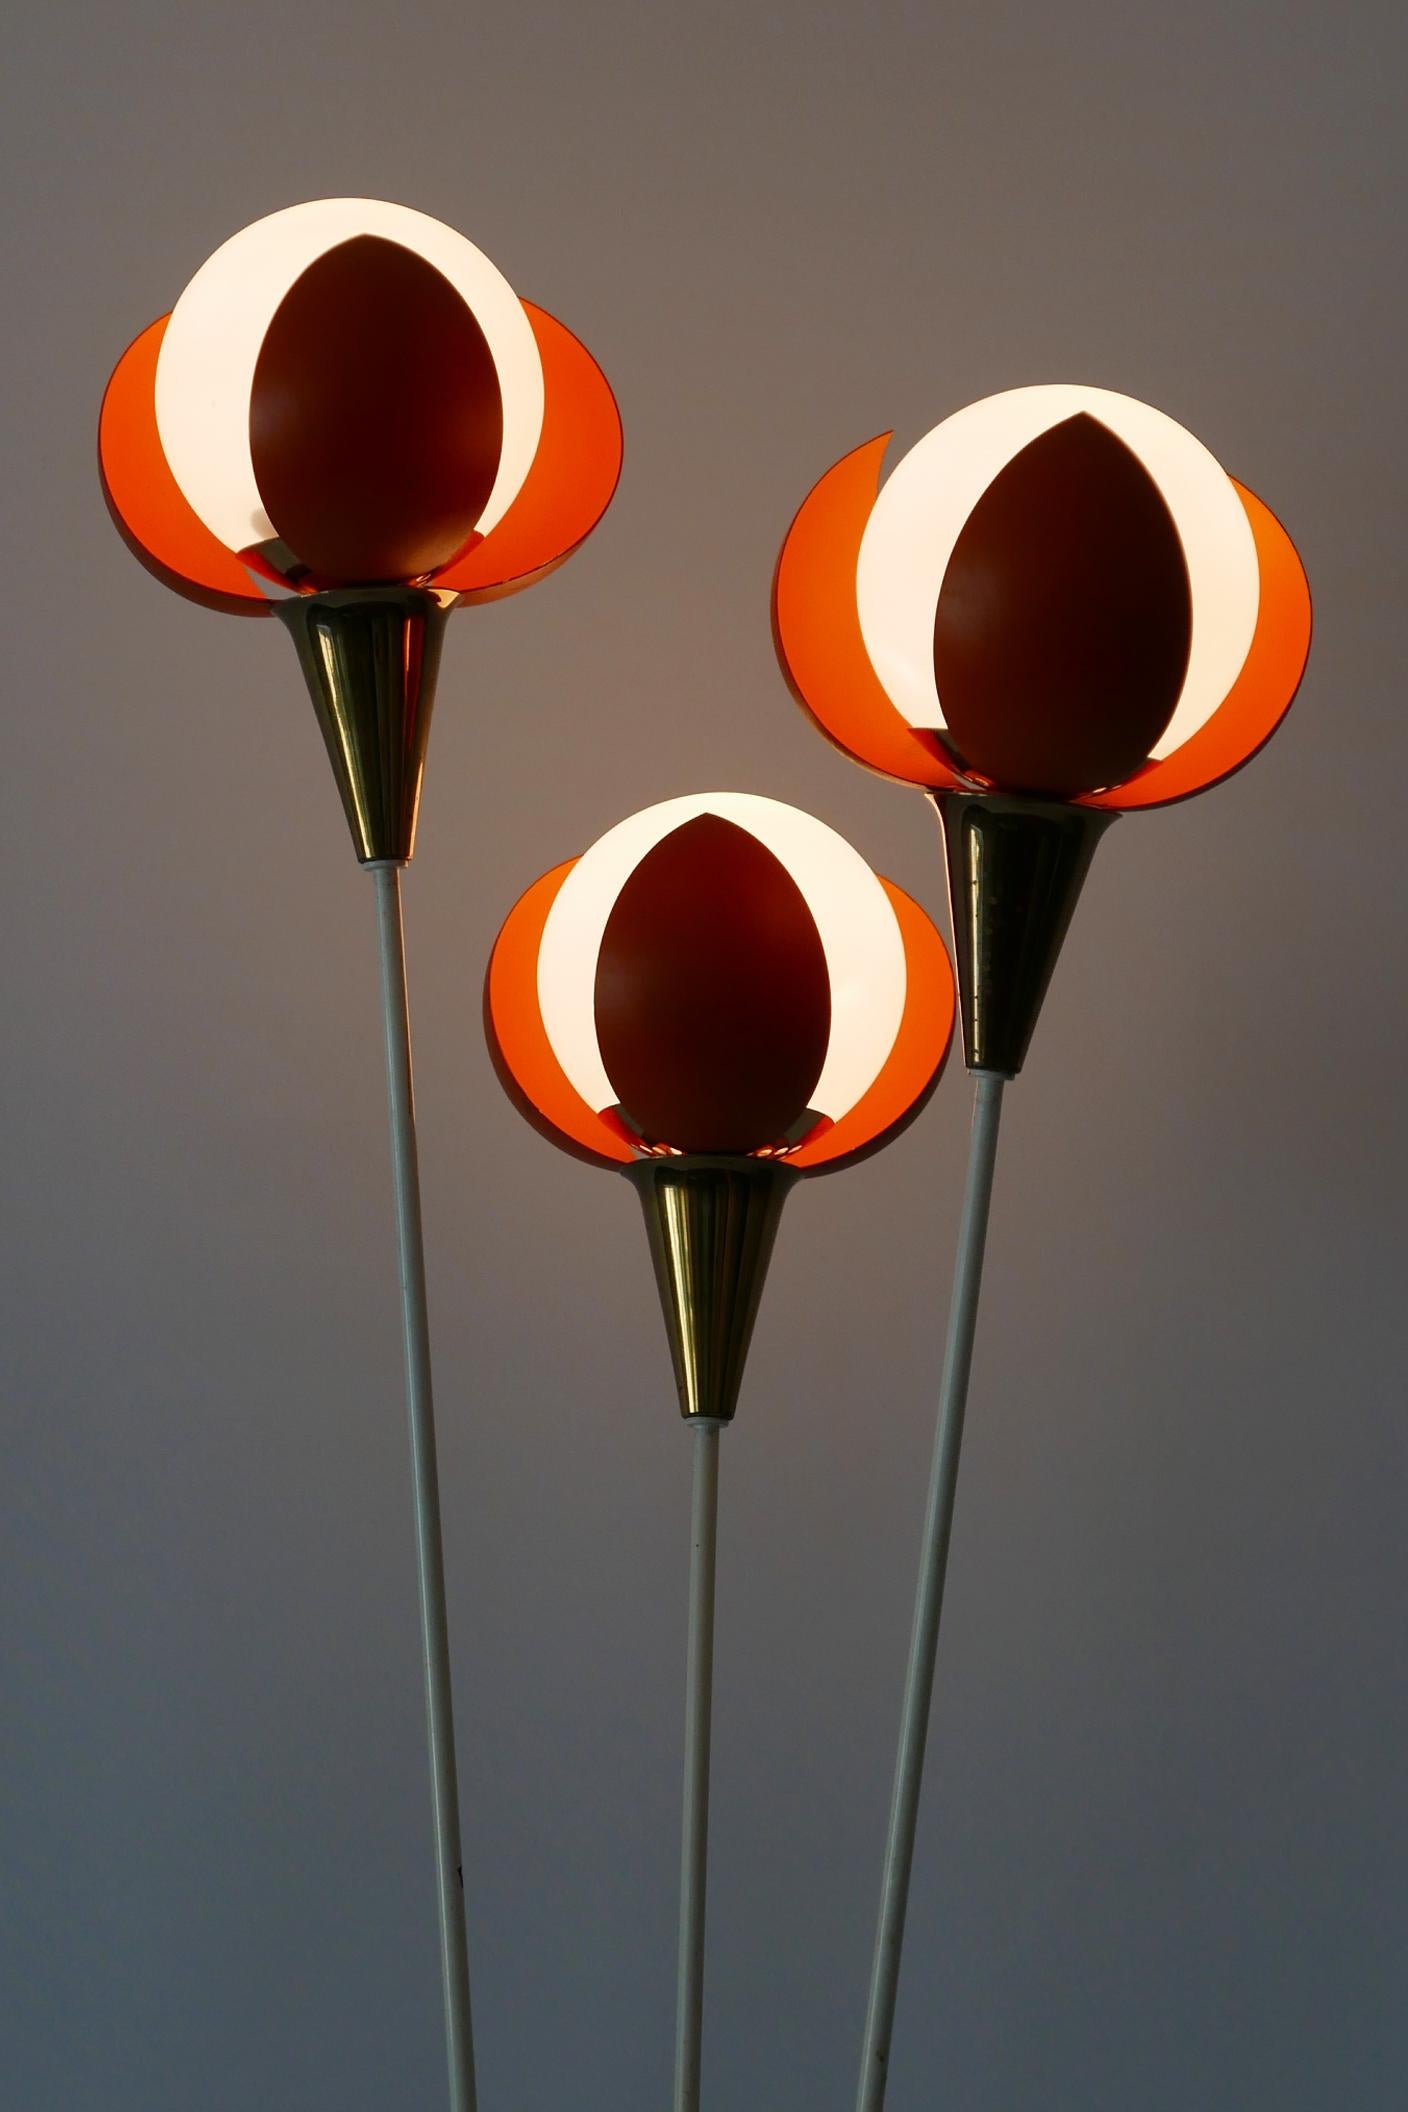 Metal Amazing Mid-Century Modern Three-Flamed Floor Lamp Buds, 1950s, France For Sale